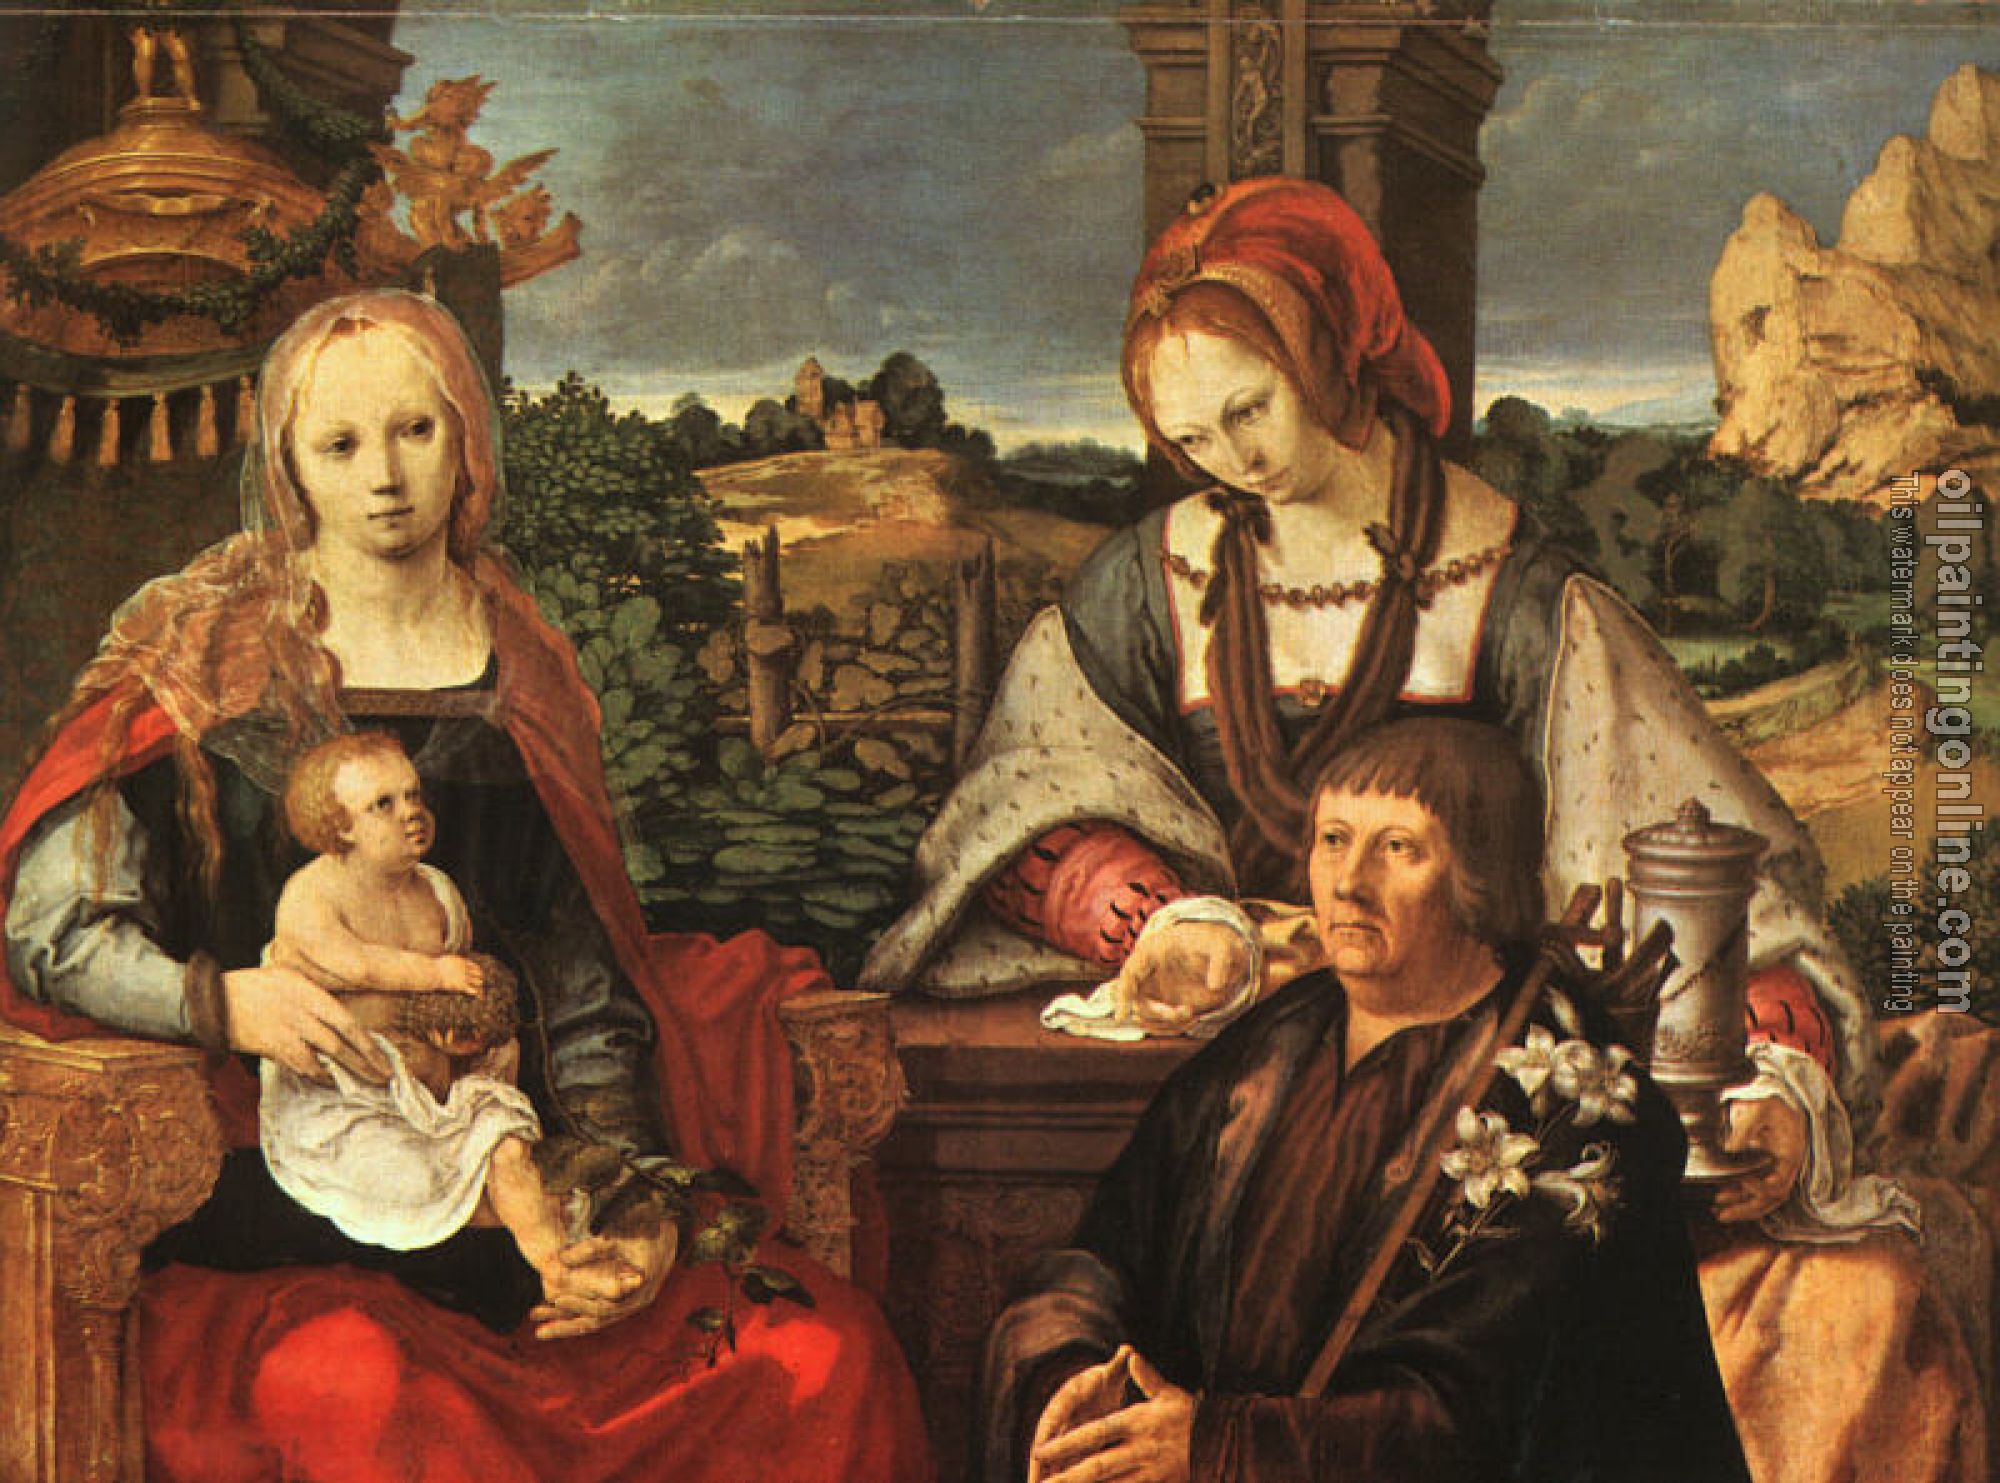 Leyden, Lucas van - Madonna and Child with Mary Magdalene and a Donor